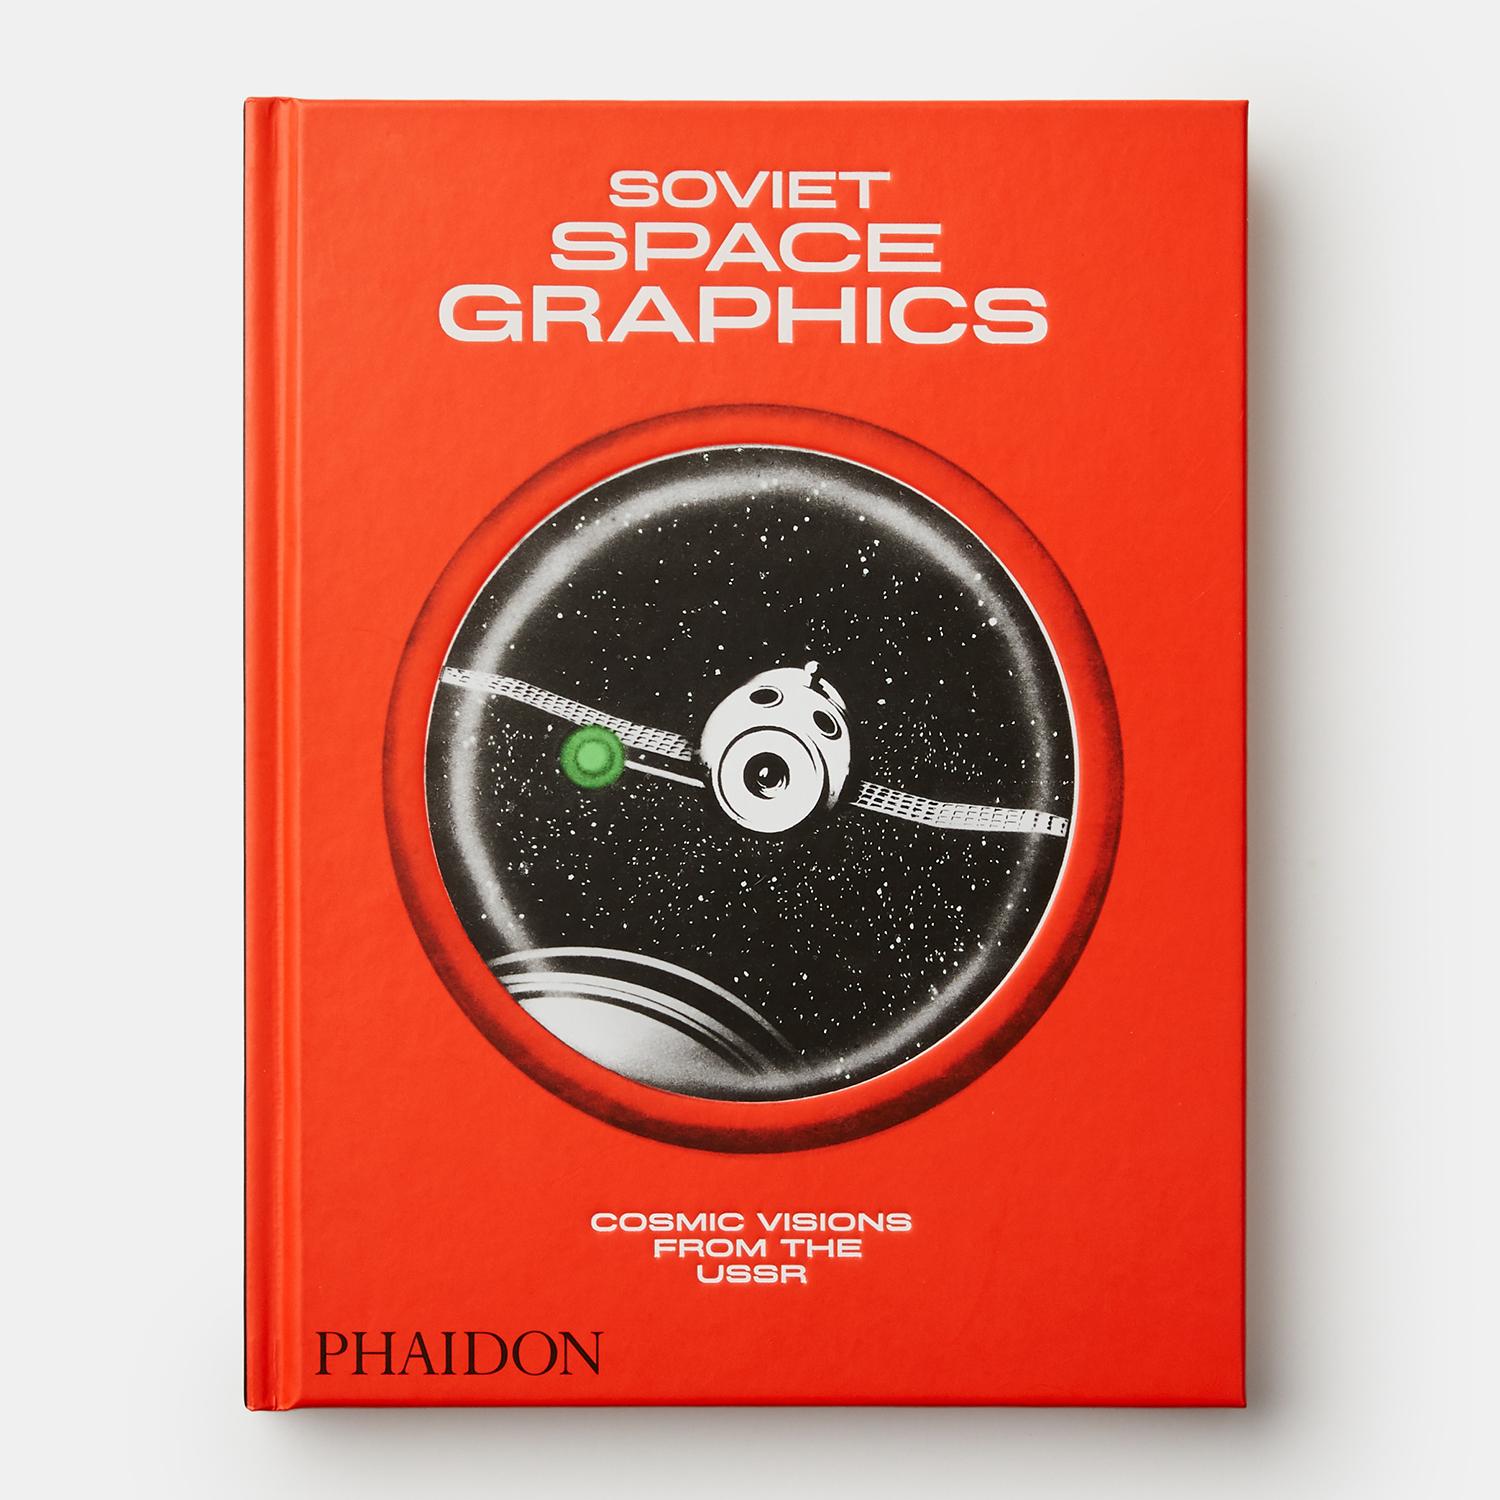 A wonderful, whimsical journey through the pioneering space-race graphics of the former Soviet Union




This otherworldly collection of Soviet space-race graphics takes readers on a cosmic adventure through Cold War-era Russia. Created against a